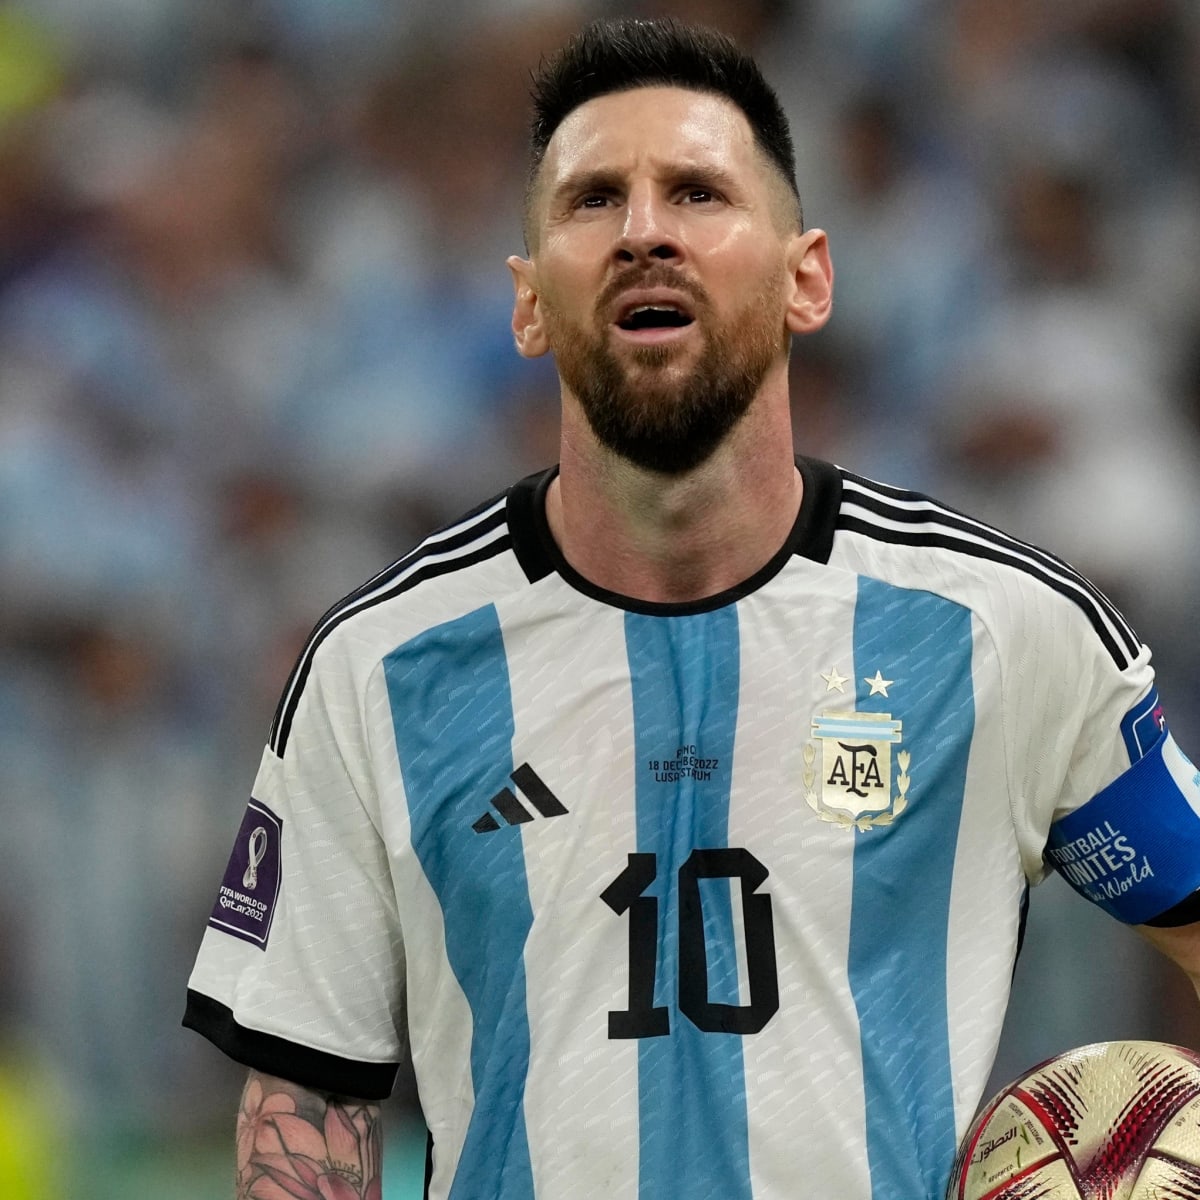 Download Two of the greatest soccer players of all time: Messi and